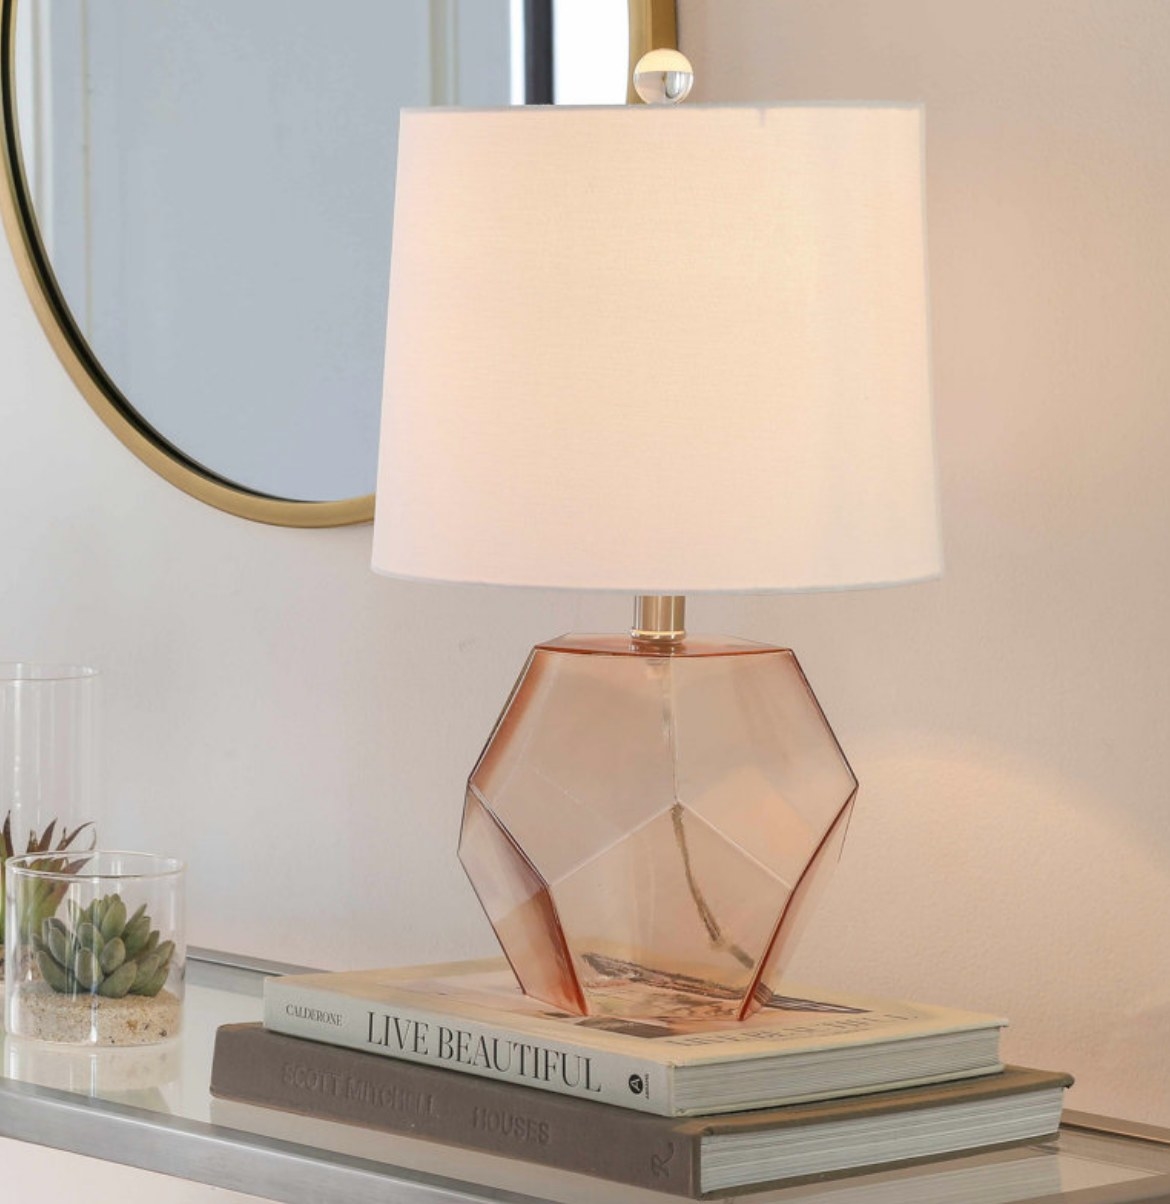 A pink glass table lamp